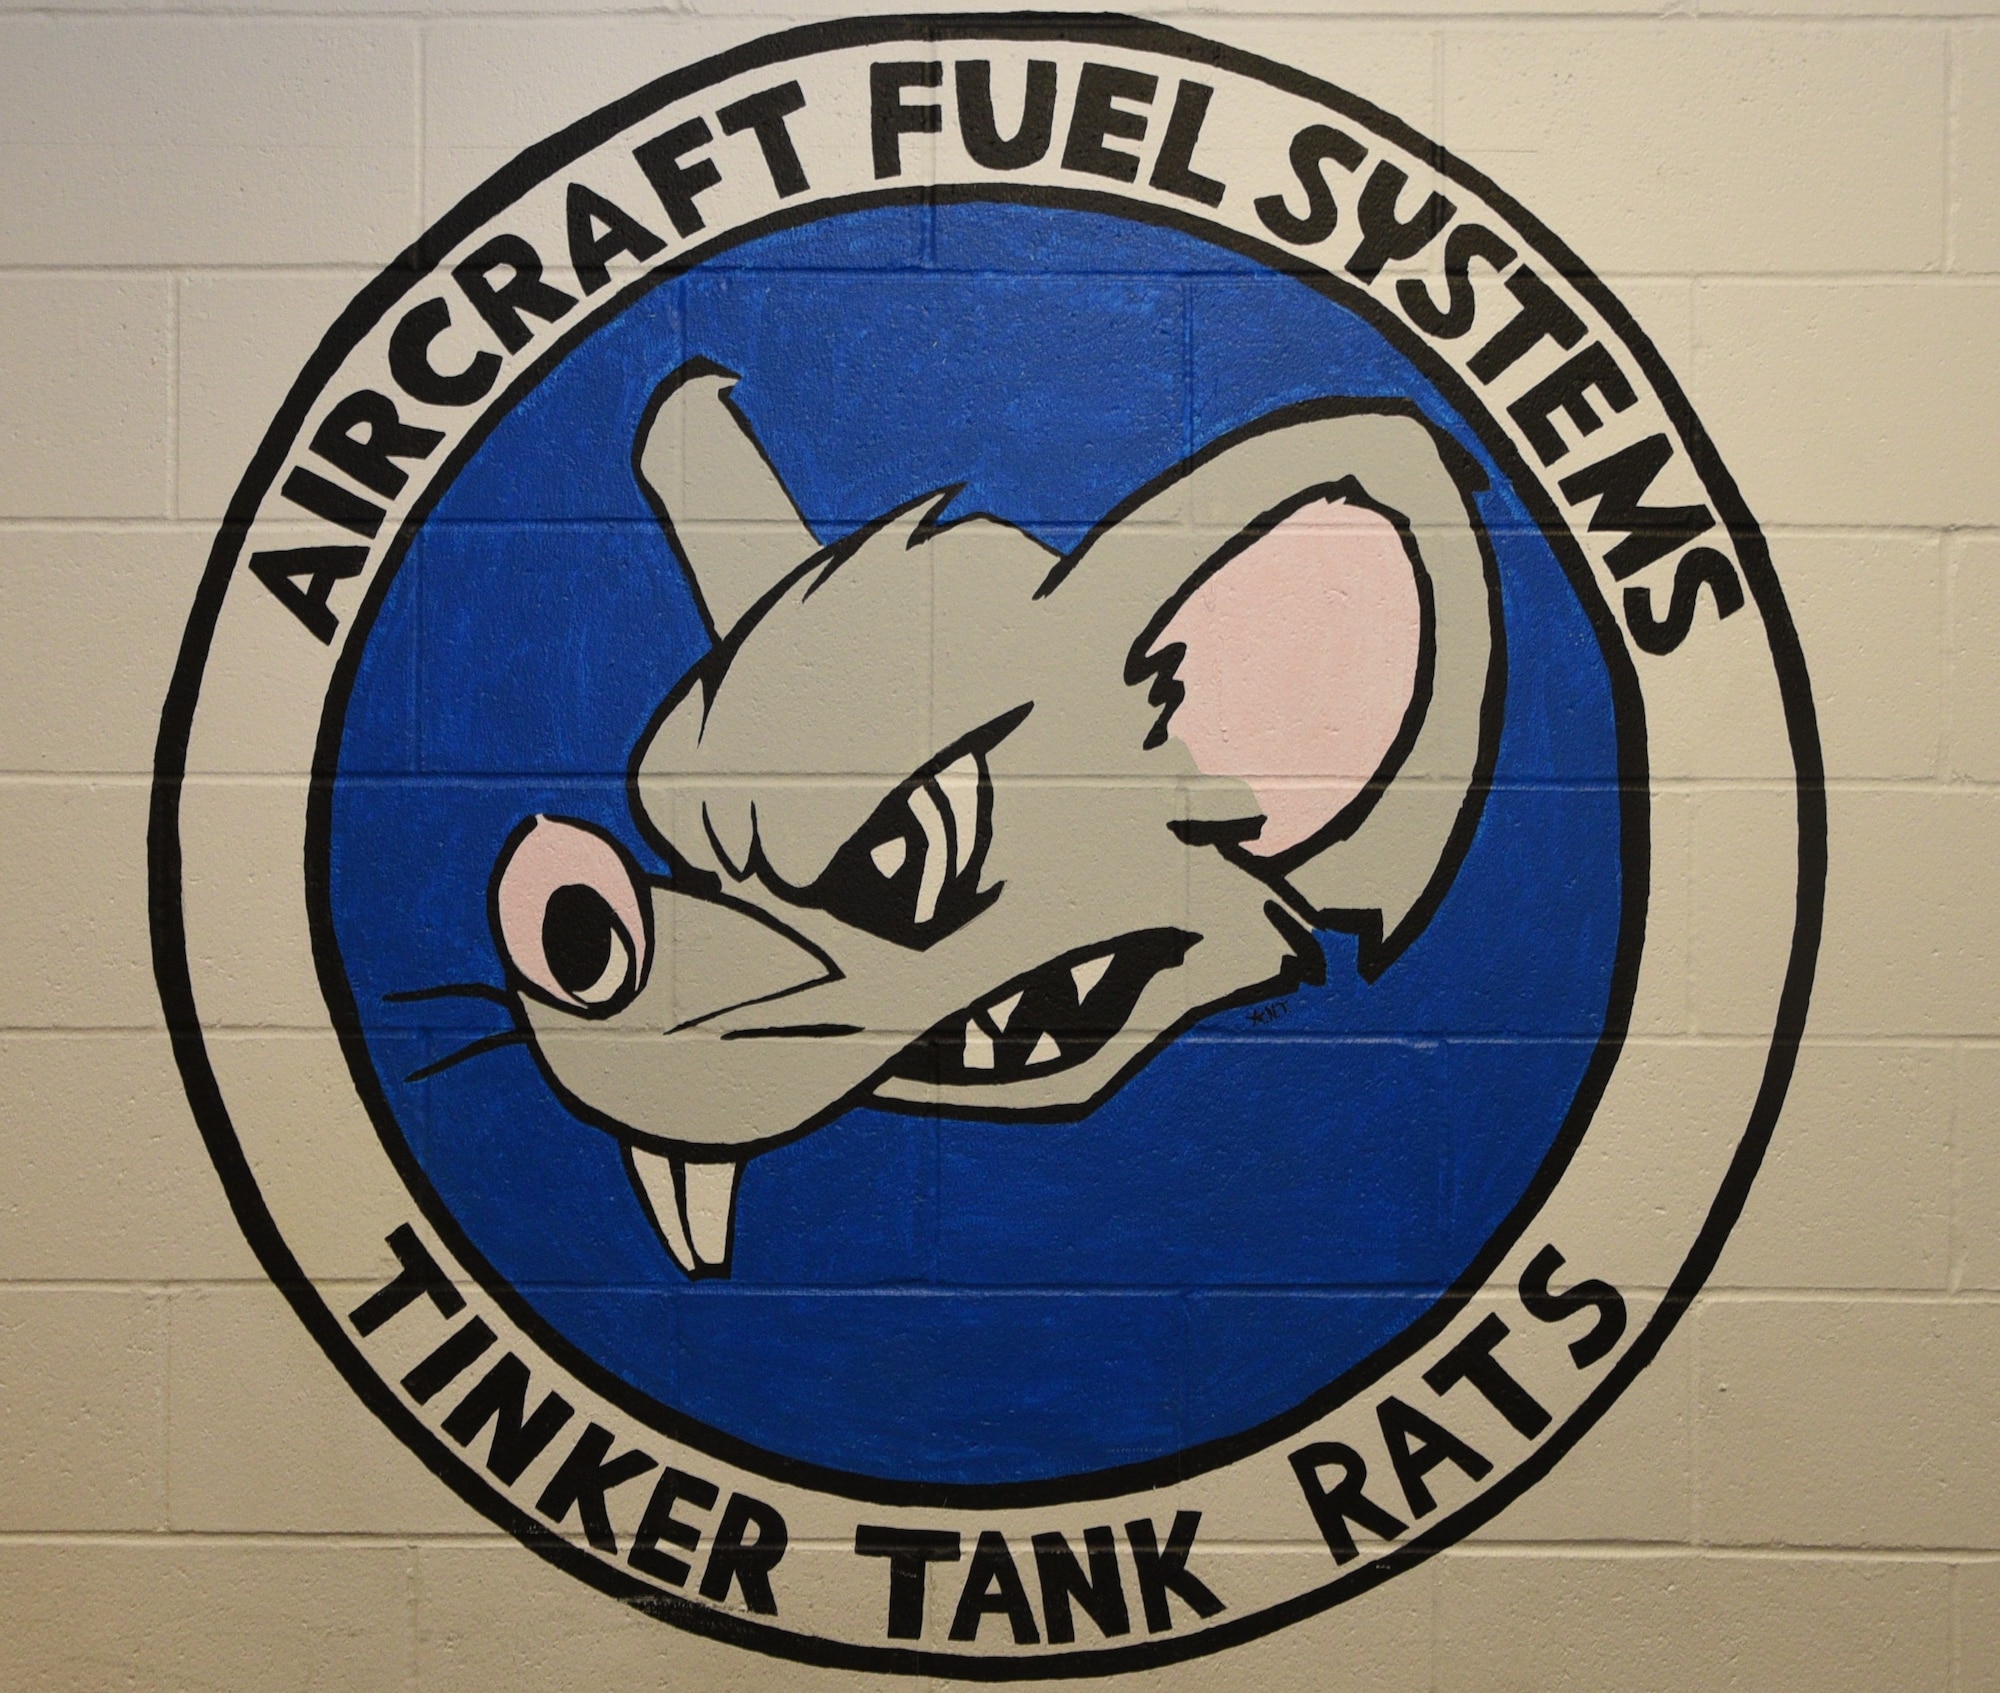 The Aircraft Fuel Systems unit, also known as the Tinker Tank Rats, is composed of 52 members. They are located in Bldg. 976 on the south side of Tinker Air Force Base. Here they maintain the fuel tanks of the Boeing E-3 Sentry Airborne Warning and Control Systems. (U.S. Air Force photo/2nd Lt. Ashlyn K. Paulson)